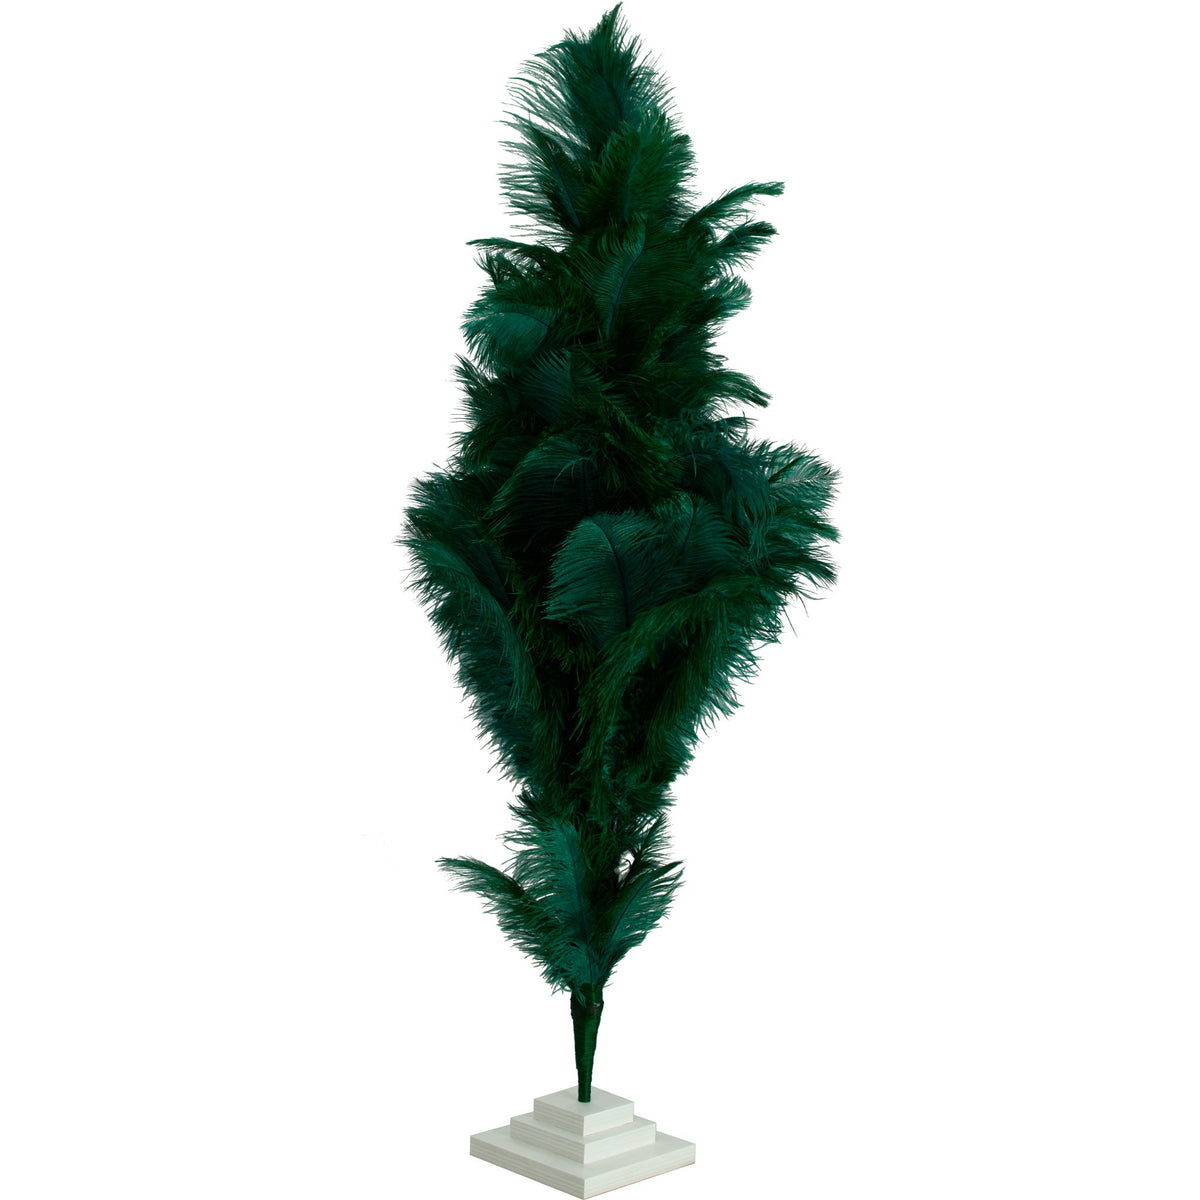 Green Ostrich Feather Trees are made for Easy Storage - Strong bendable wire can be wrapped into any type of storage box